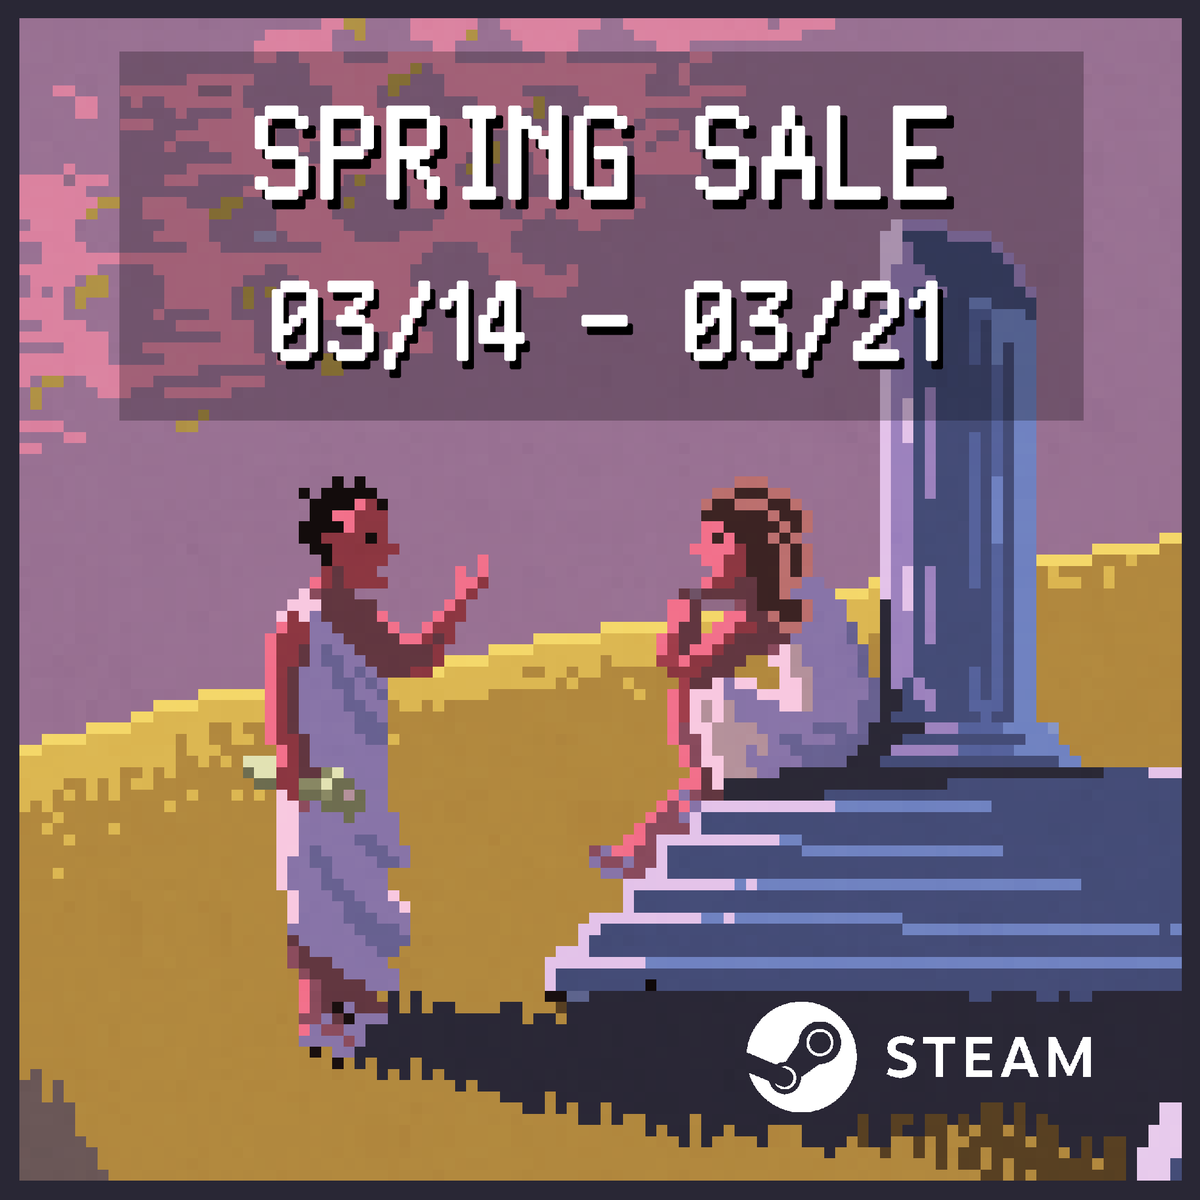 🌸🌸SPRING SALE🌸🌸
🔊All our games 25% off‼️
📆From 03/14 to 03/21!!
🛒store.steampowered.com/search/?term=o…

#MidnightScenes #TheLibrarian #TheSupper #Unwelcome #Sale #creepy #horror #mystery #pixelart #Darkgame